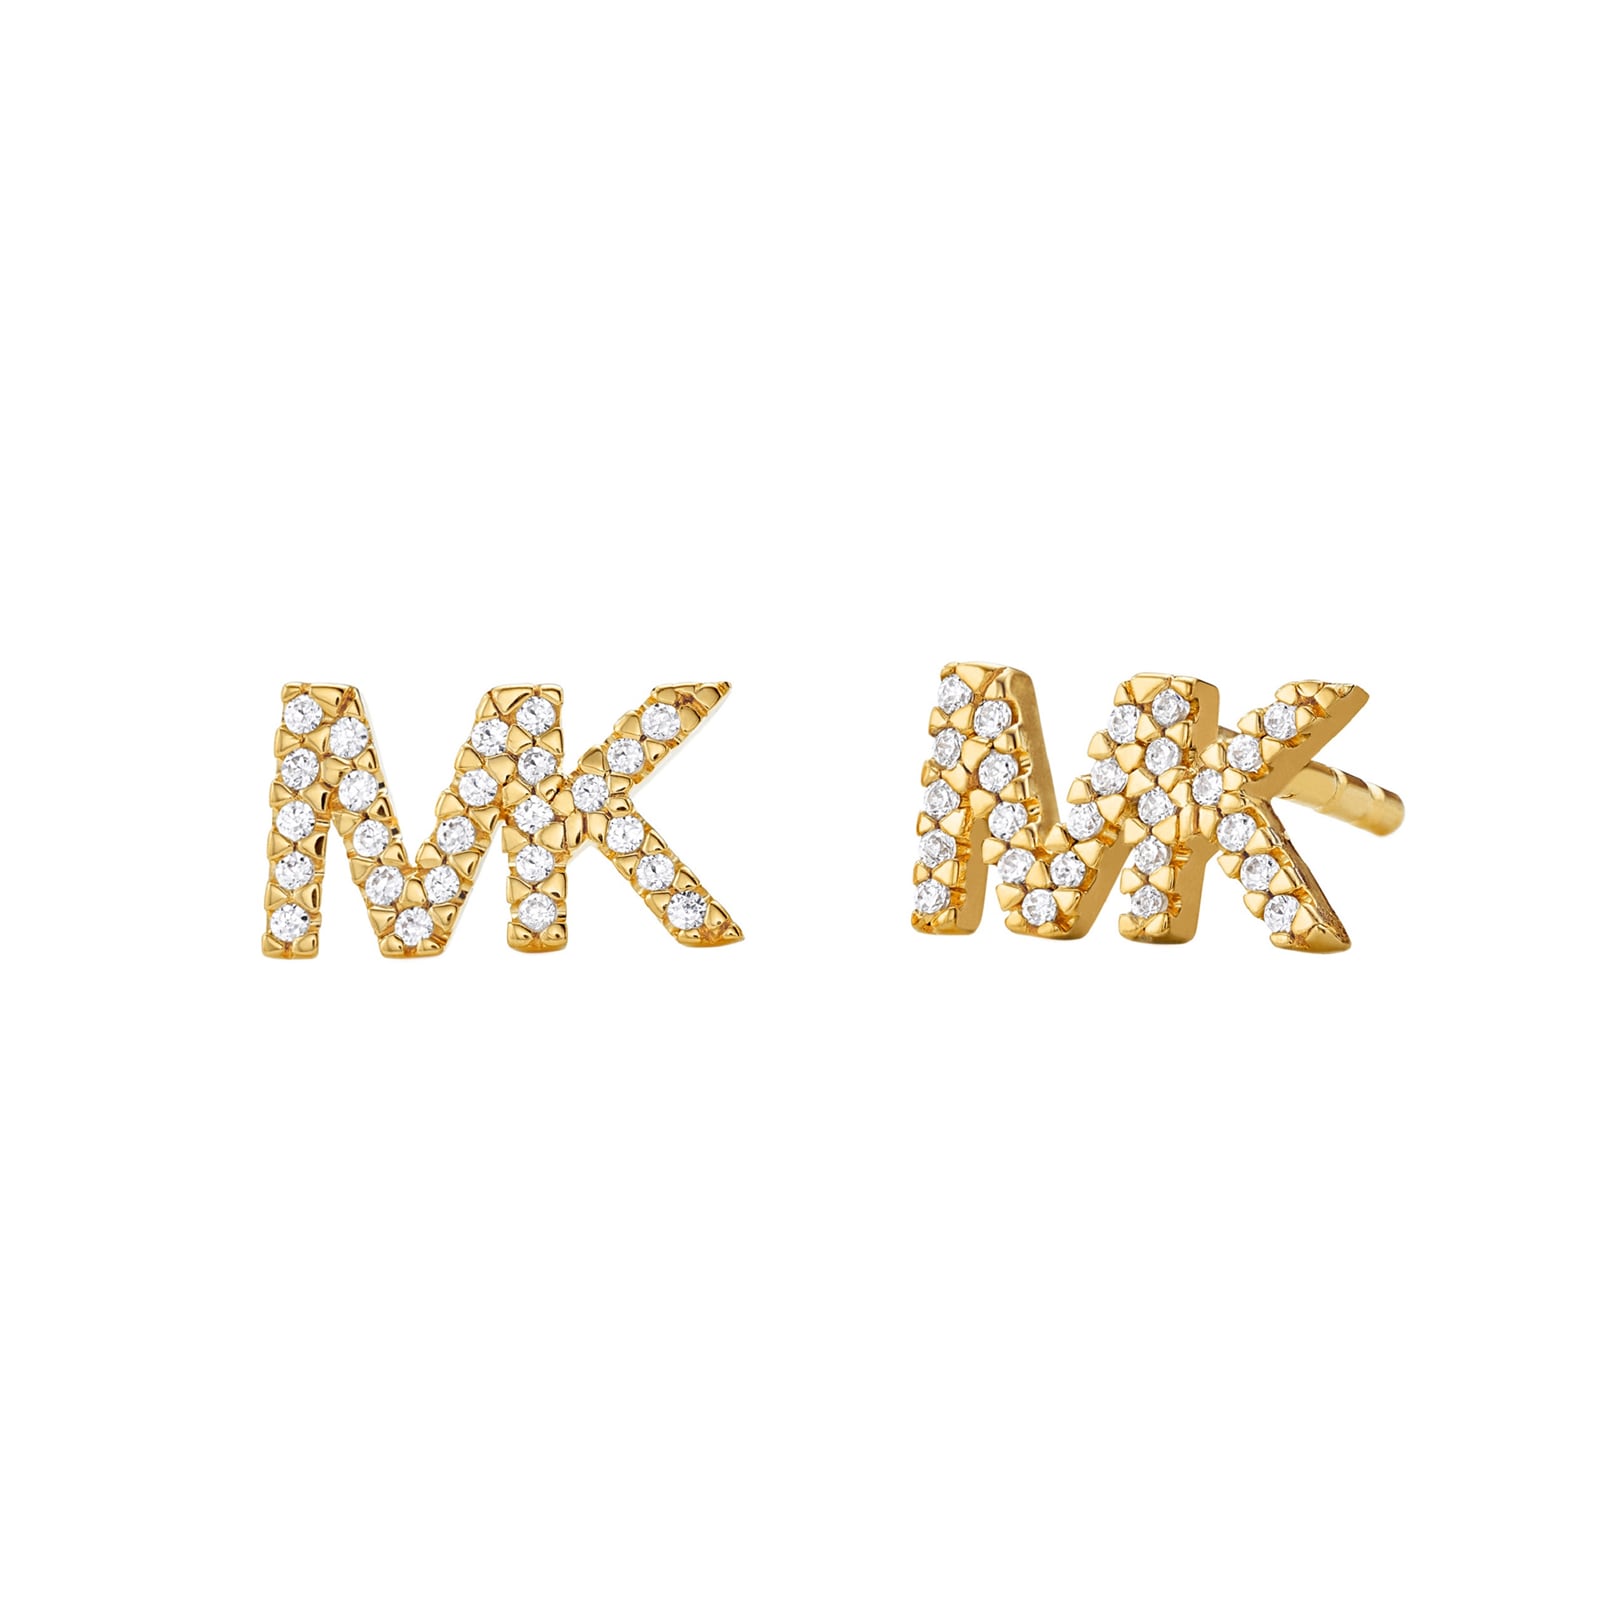 50 OFF  Michael Kors Discount Code Student July NO SIGNUP